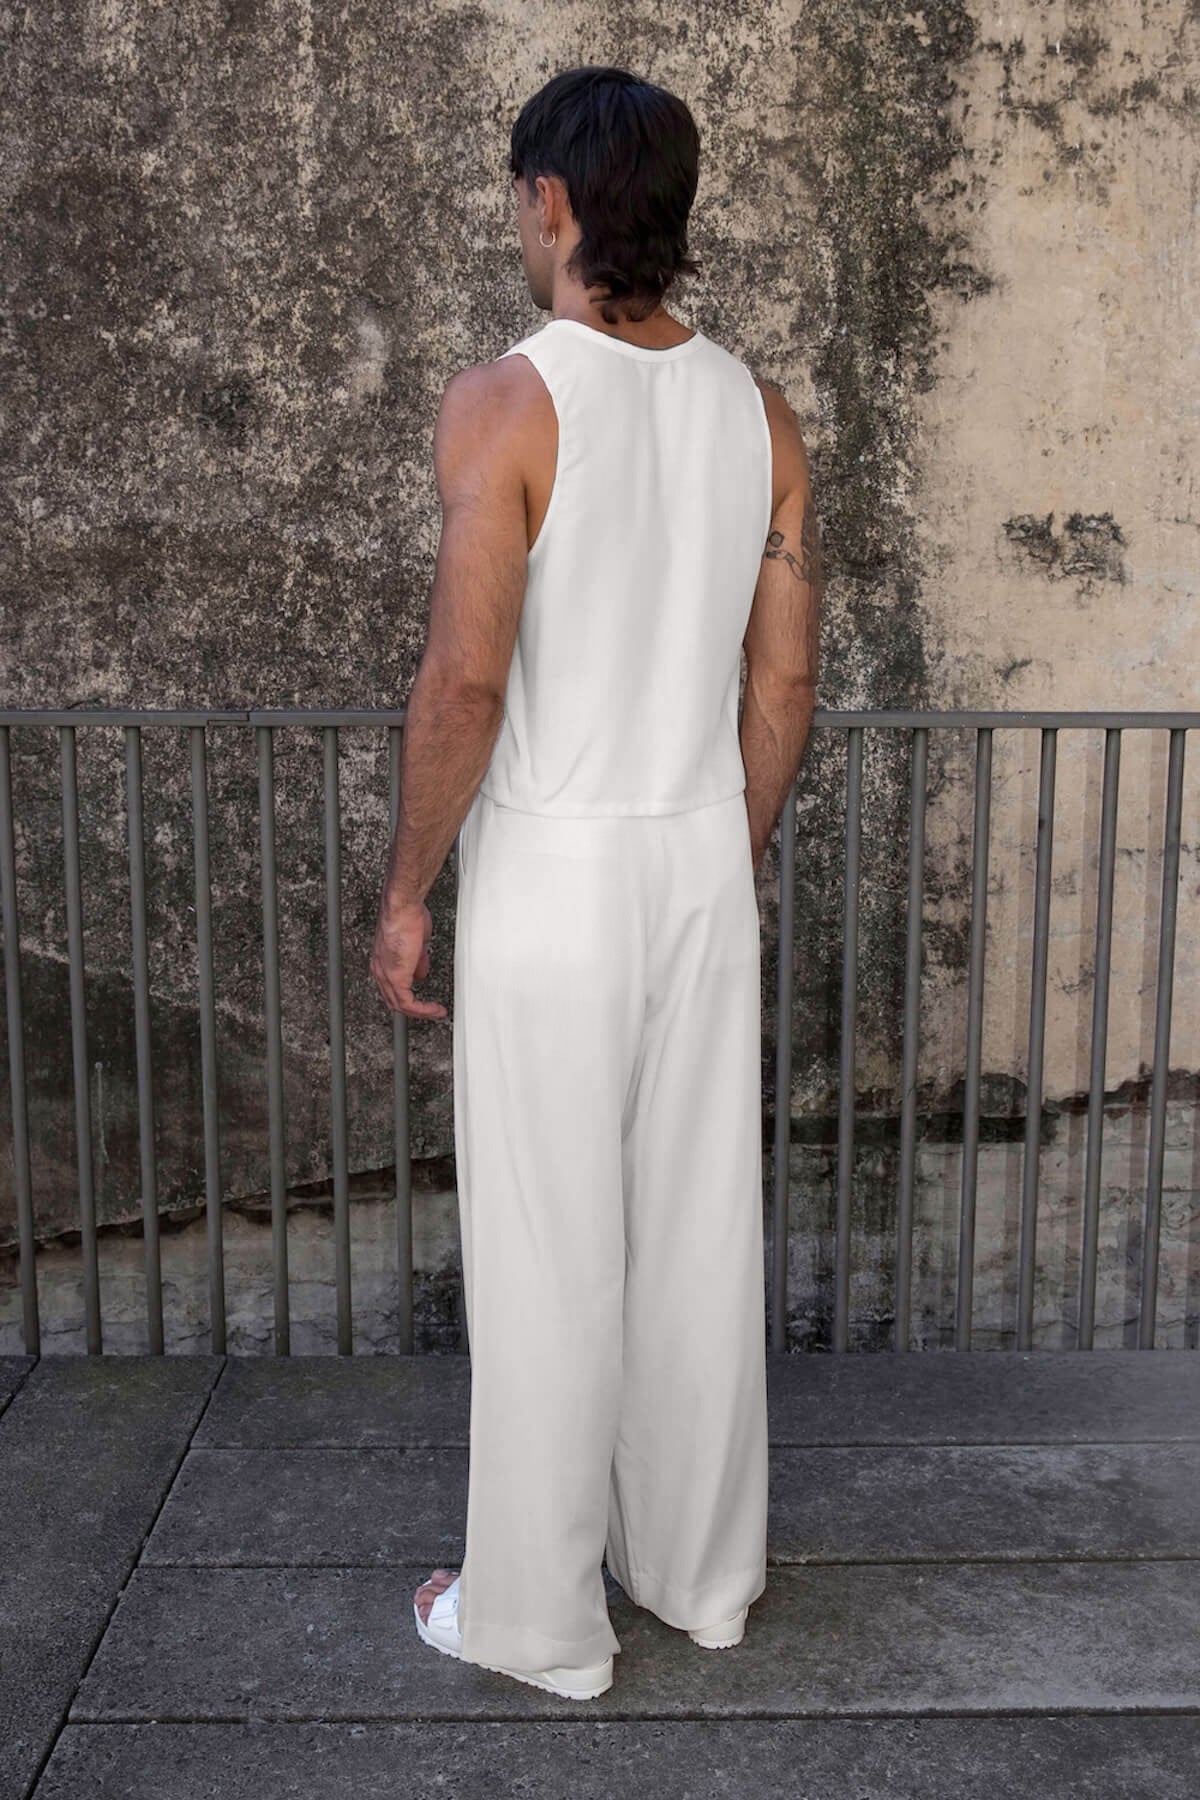 Men's high waisted pants in white and men's cropped top